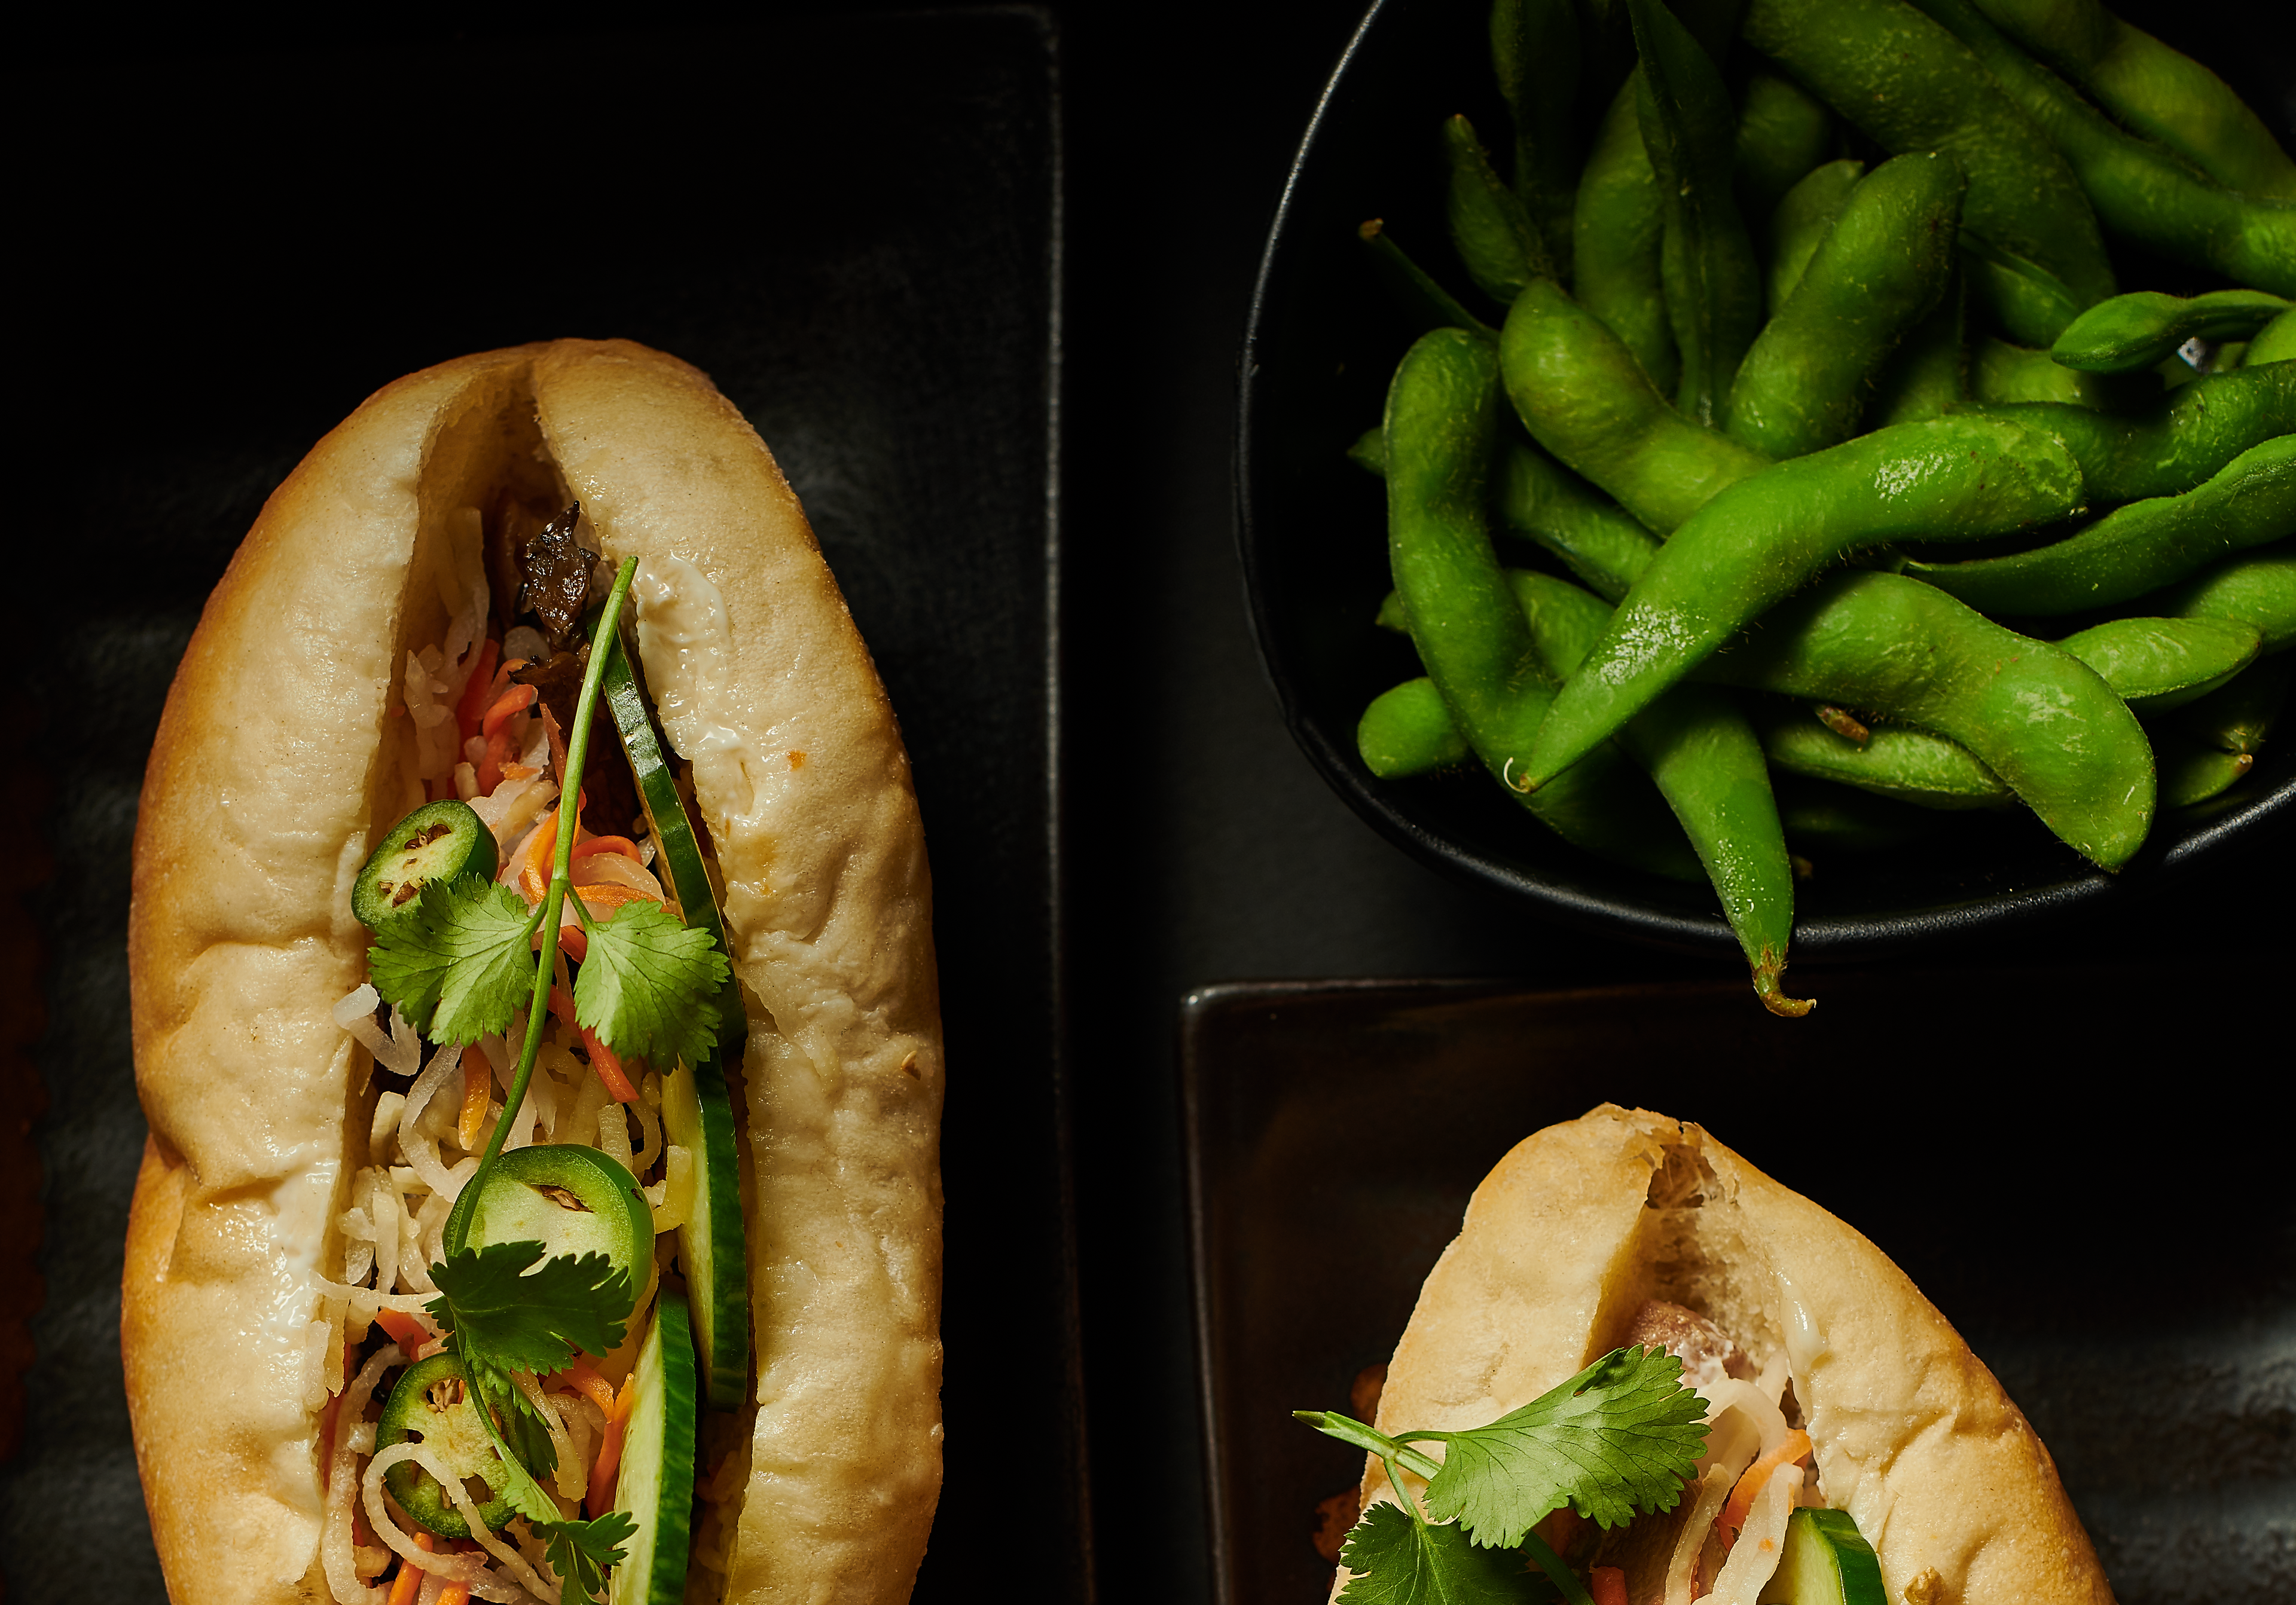 Two bánh mì sandwiches photographed alongside a plate of edamame on a dark background.